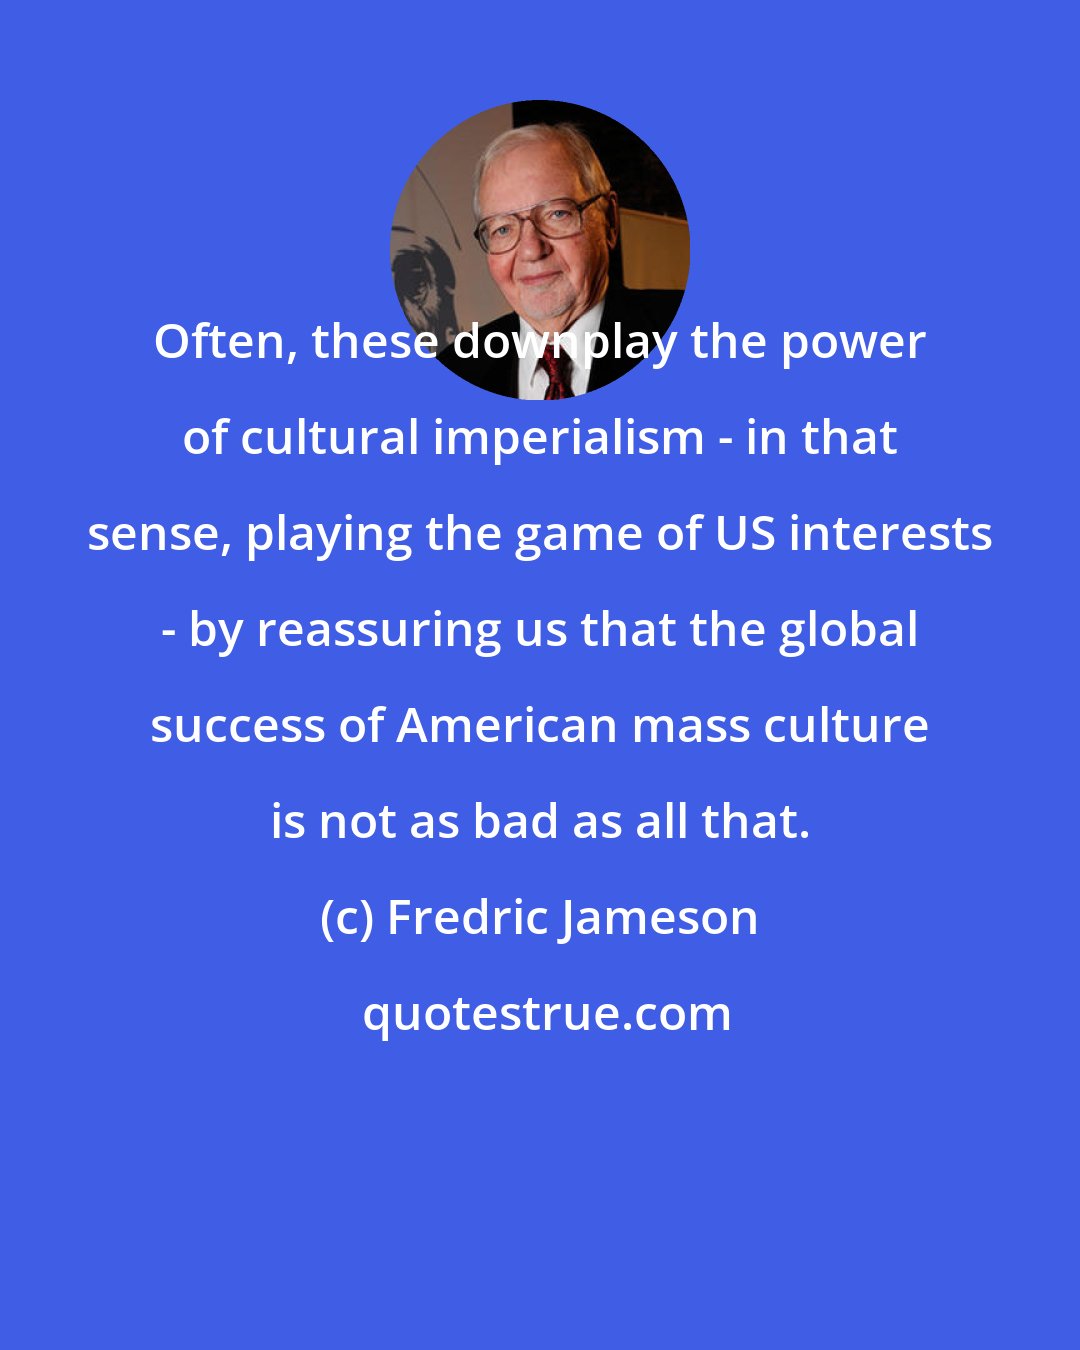 Fredric Jameson: Often, these downplay the power of cultural imperialism - in that sense, playing the game of US interests - by reassuring us that the global success of American mass culture is not as bad as all that.